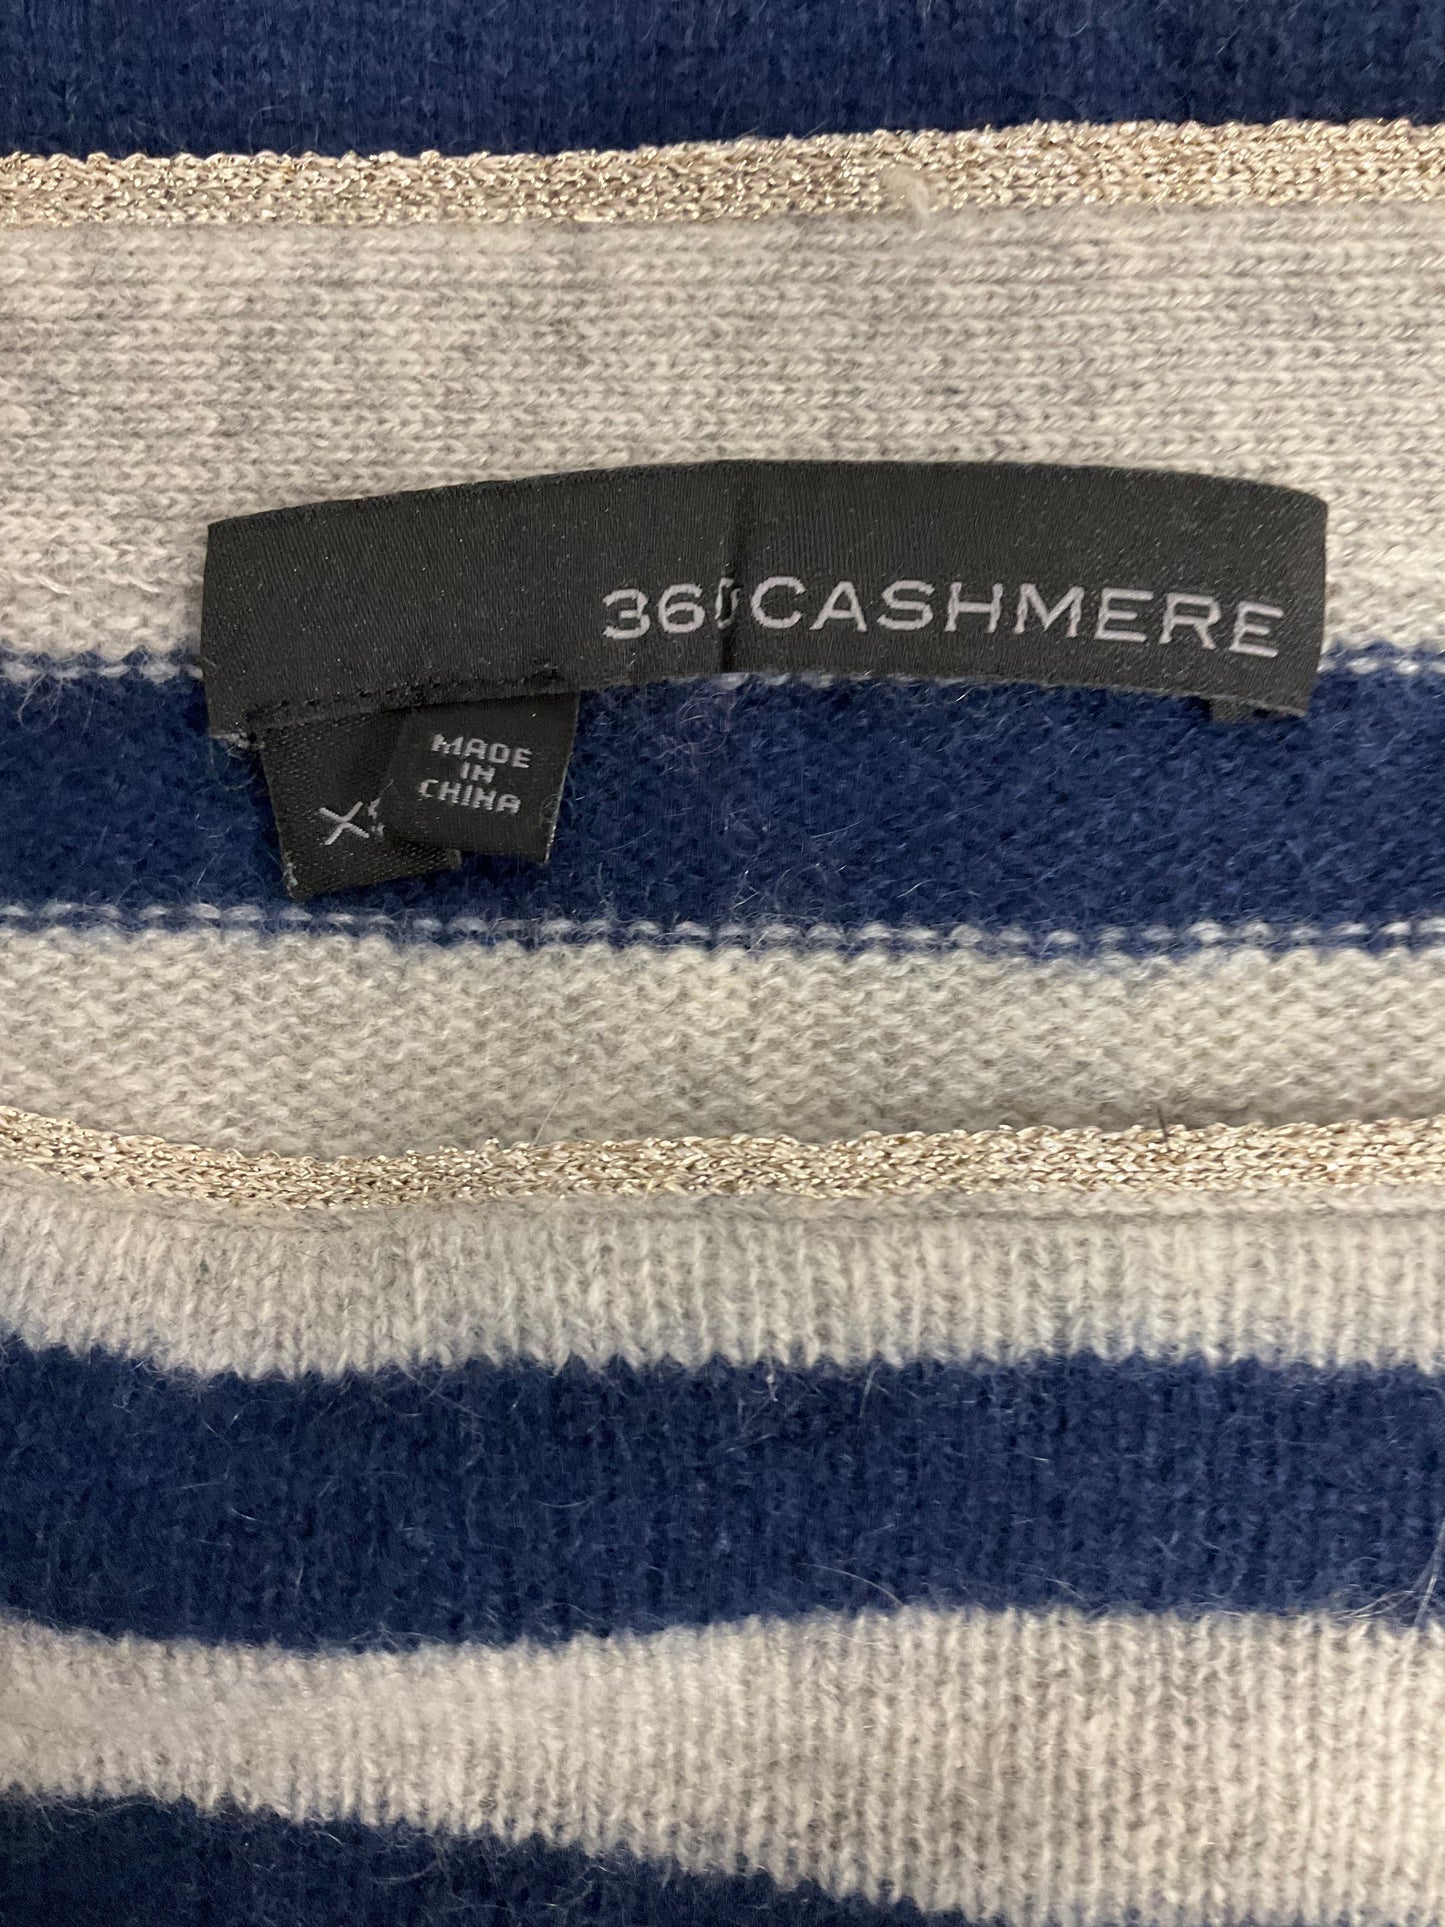 Sweater By 360cashmere  Size: Xs